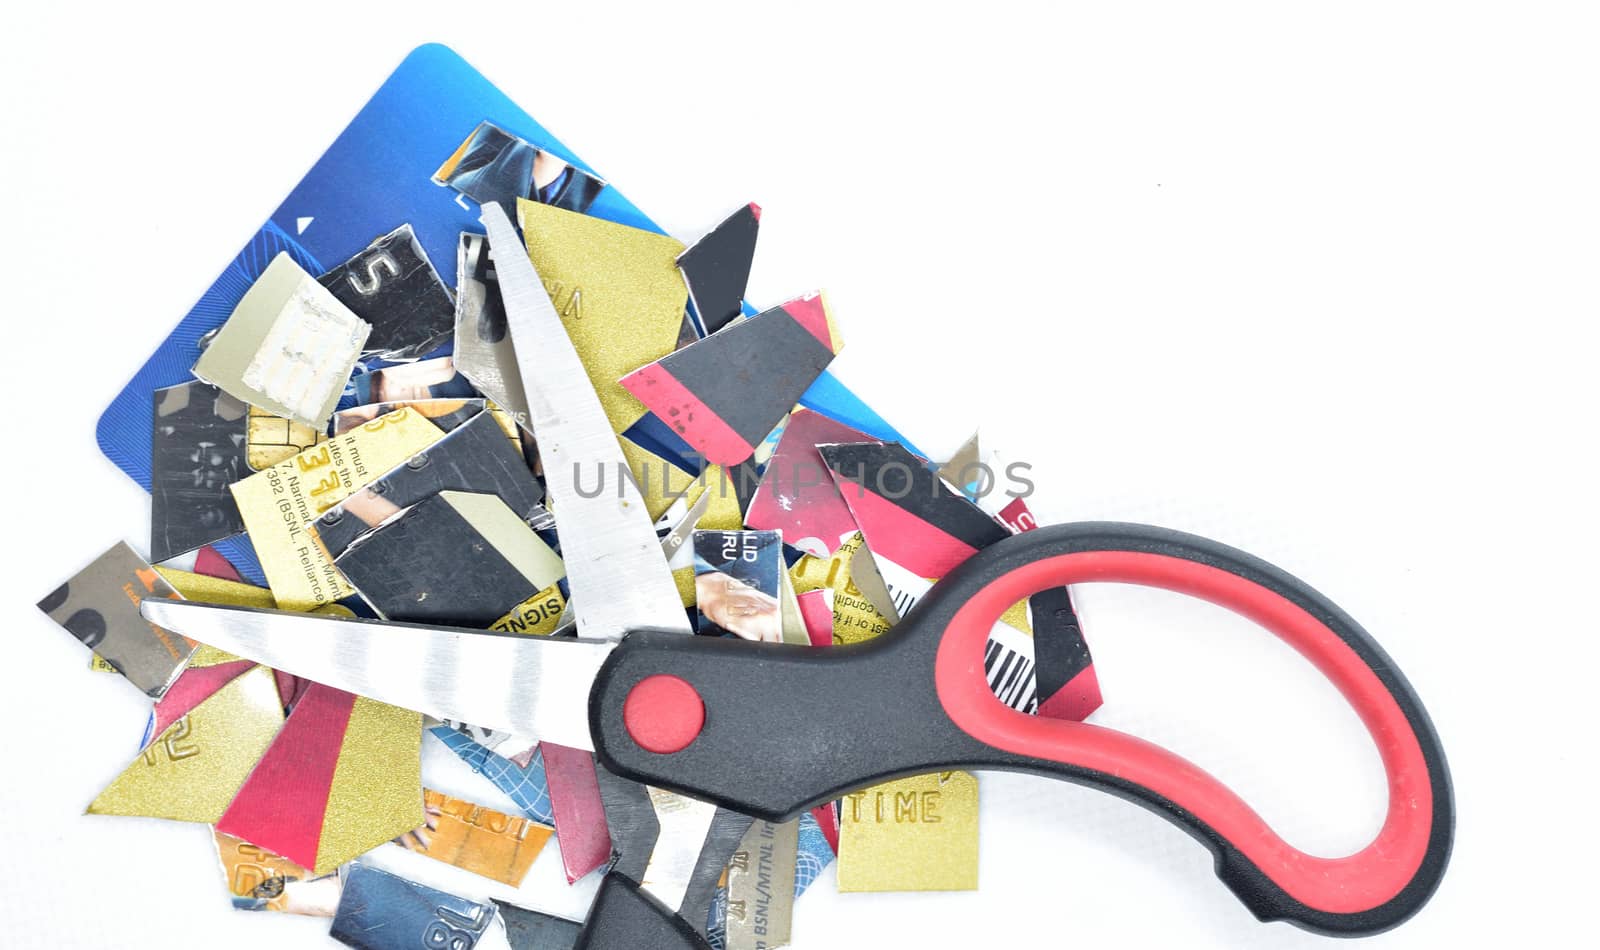 Cut card as pieces with scissors for stop to pay money protect crisis cost